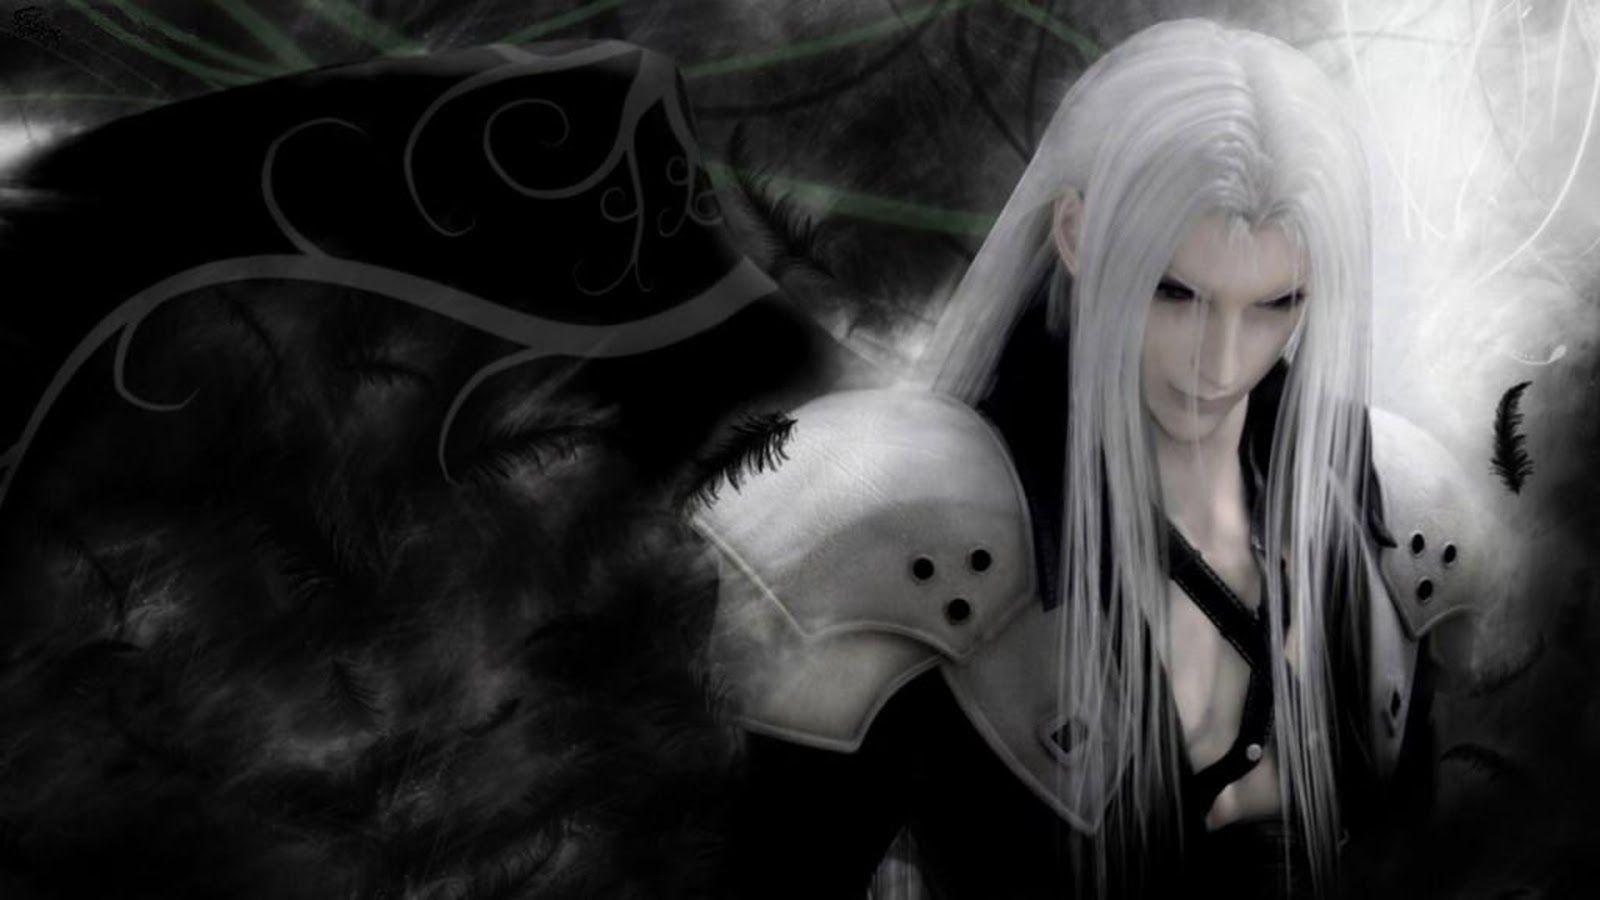 Wallpapers For > Final Fantasy 7 Wallpapers Hd Sephiroth